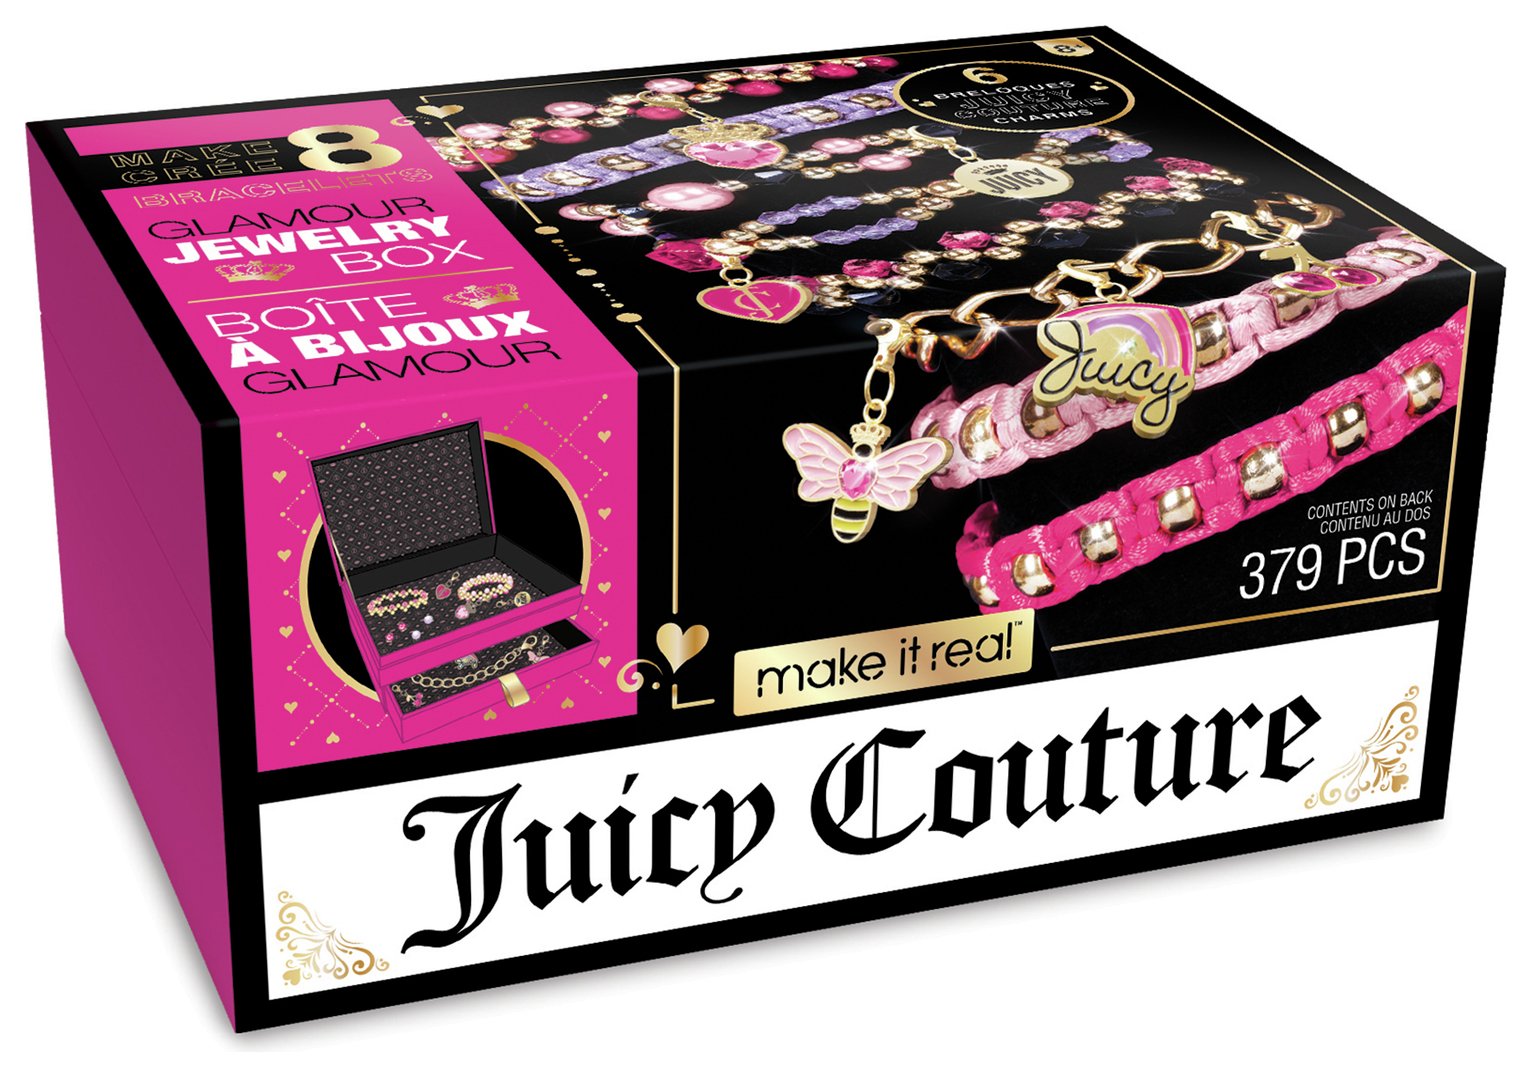 Make It Real Juicy Couture Glamour Box Jewelry Set